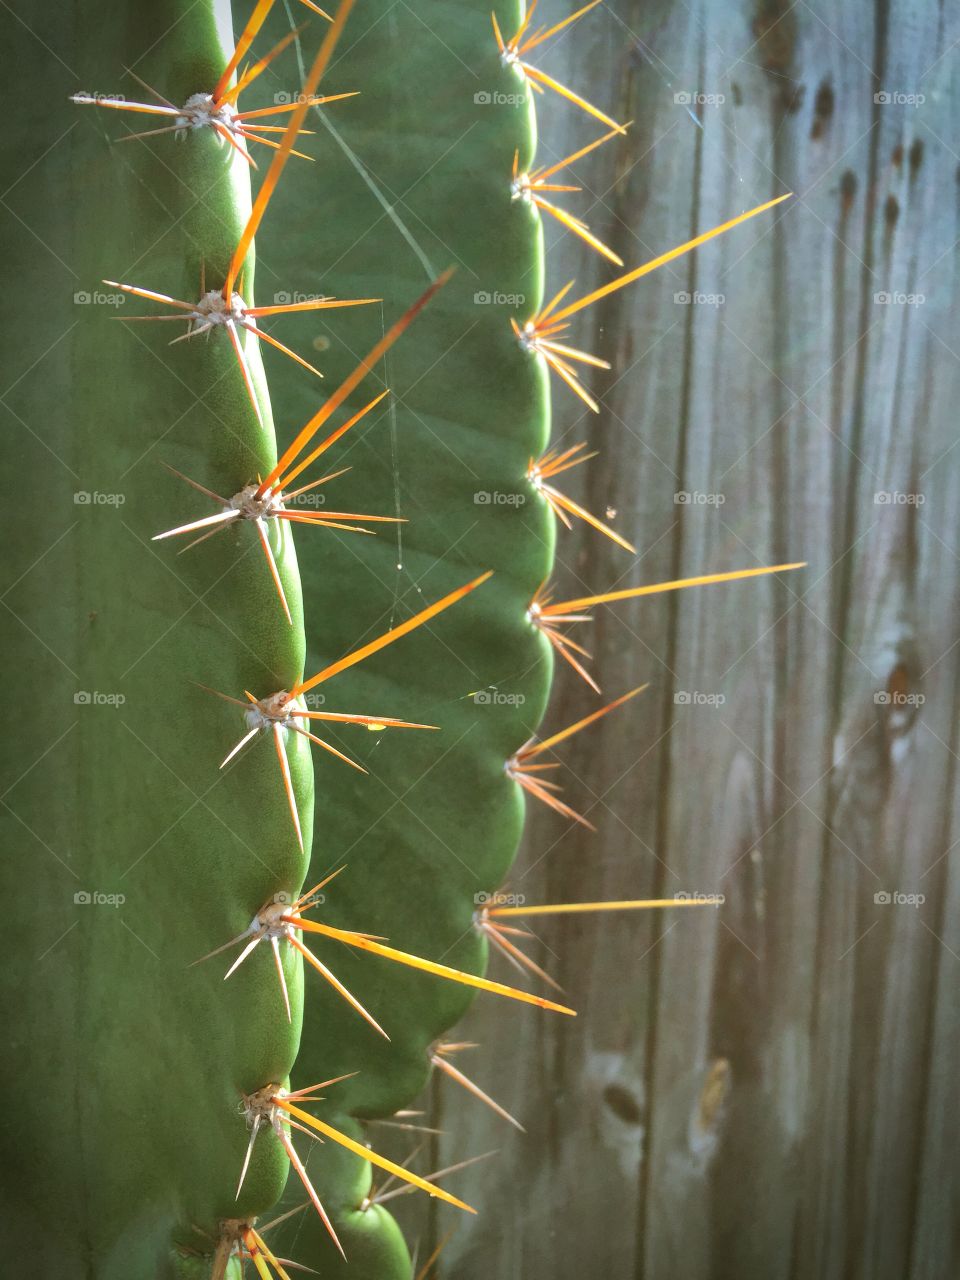 SMOOTH AND PRICKLY 